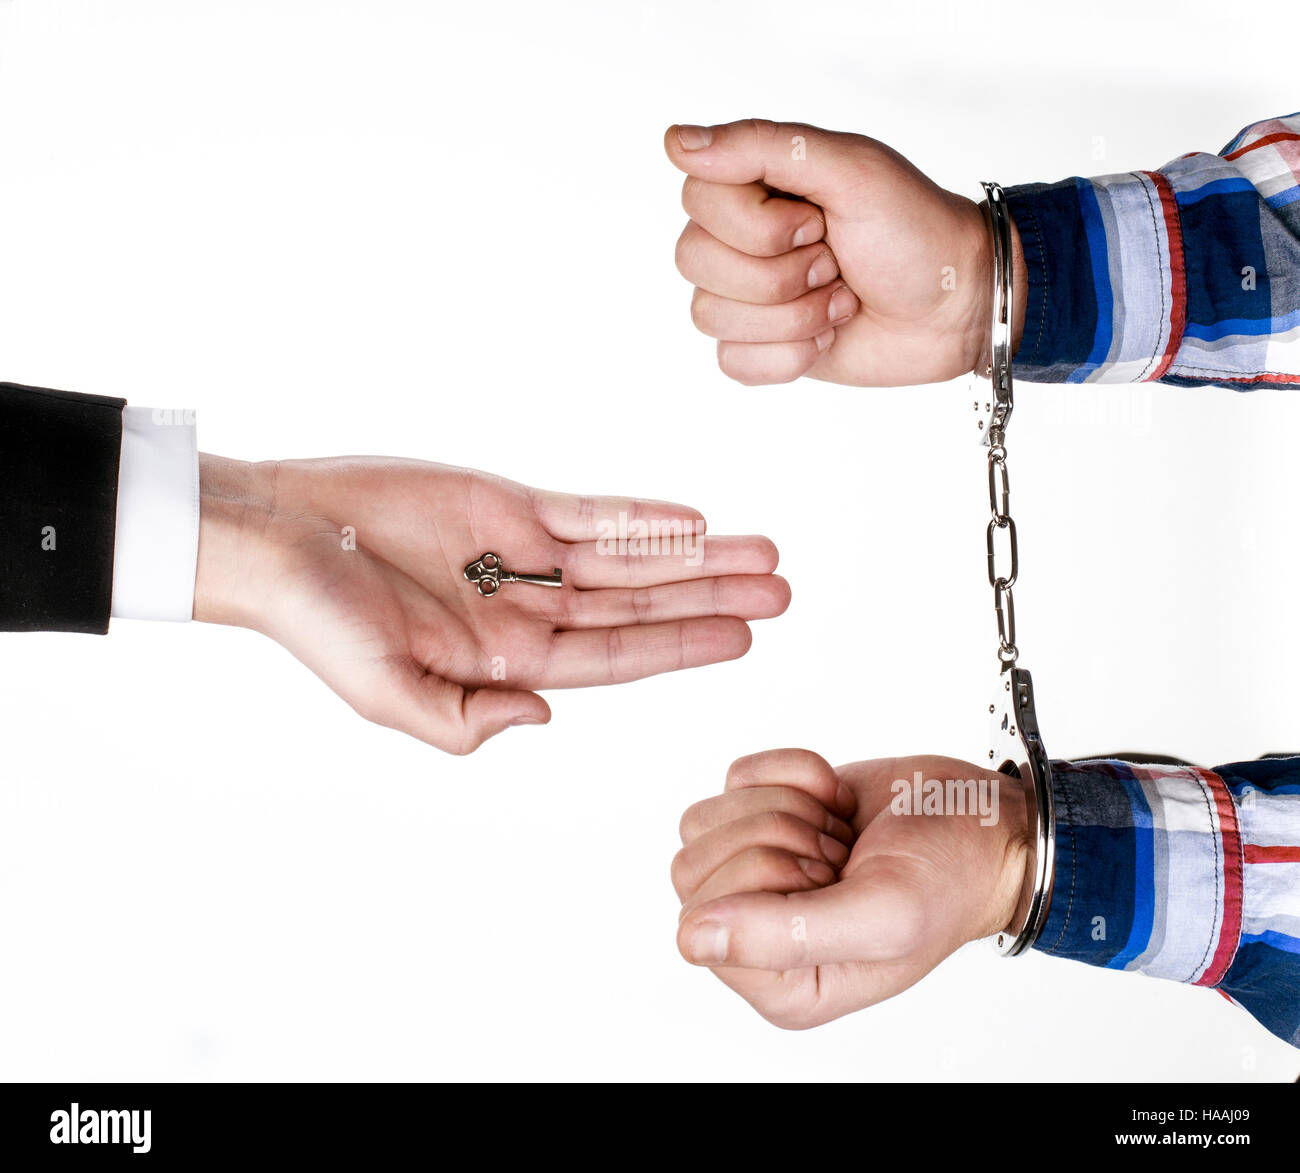 lawyer gives key of the handcuffs to prisoner Stock Photo